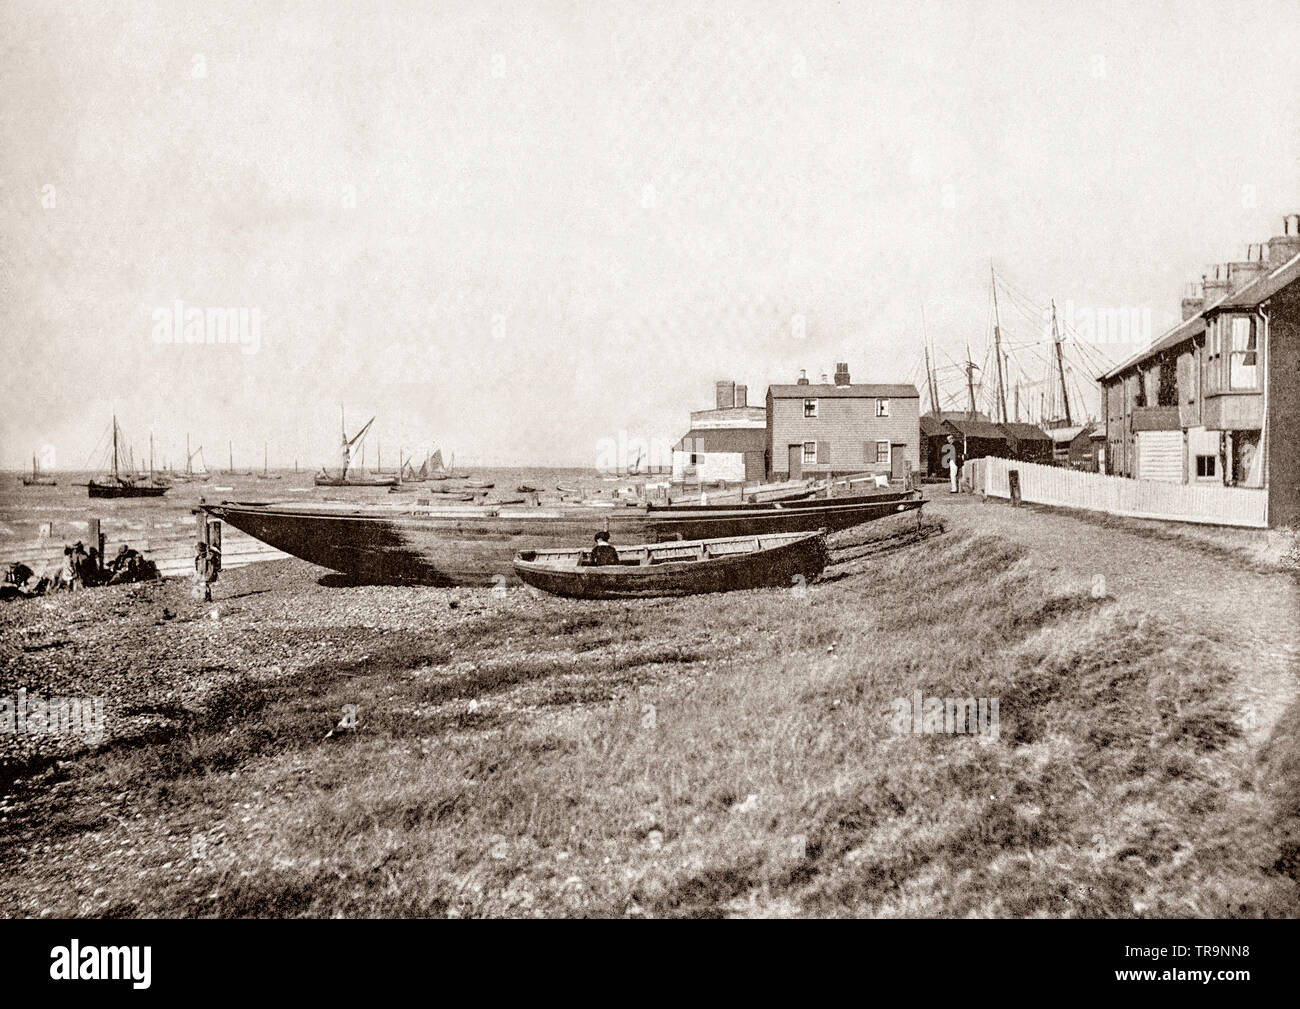 A 19th Century view of sailing boats on the seafront at Whitstable, a seaside town on the north coast of Kent in south-east England and famous for its 'Native Oysters' which were collected from beds beyond the low water mark since Roman times. In 1830, one of the earliest passenger railway services was opened by the Canterbury and Whitstable Railway Company. In 1832, the company built a harbour and extended the line to handle coal and other bulk cargos for the City of Canterbury. Stock Photo